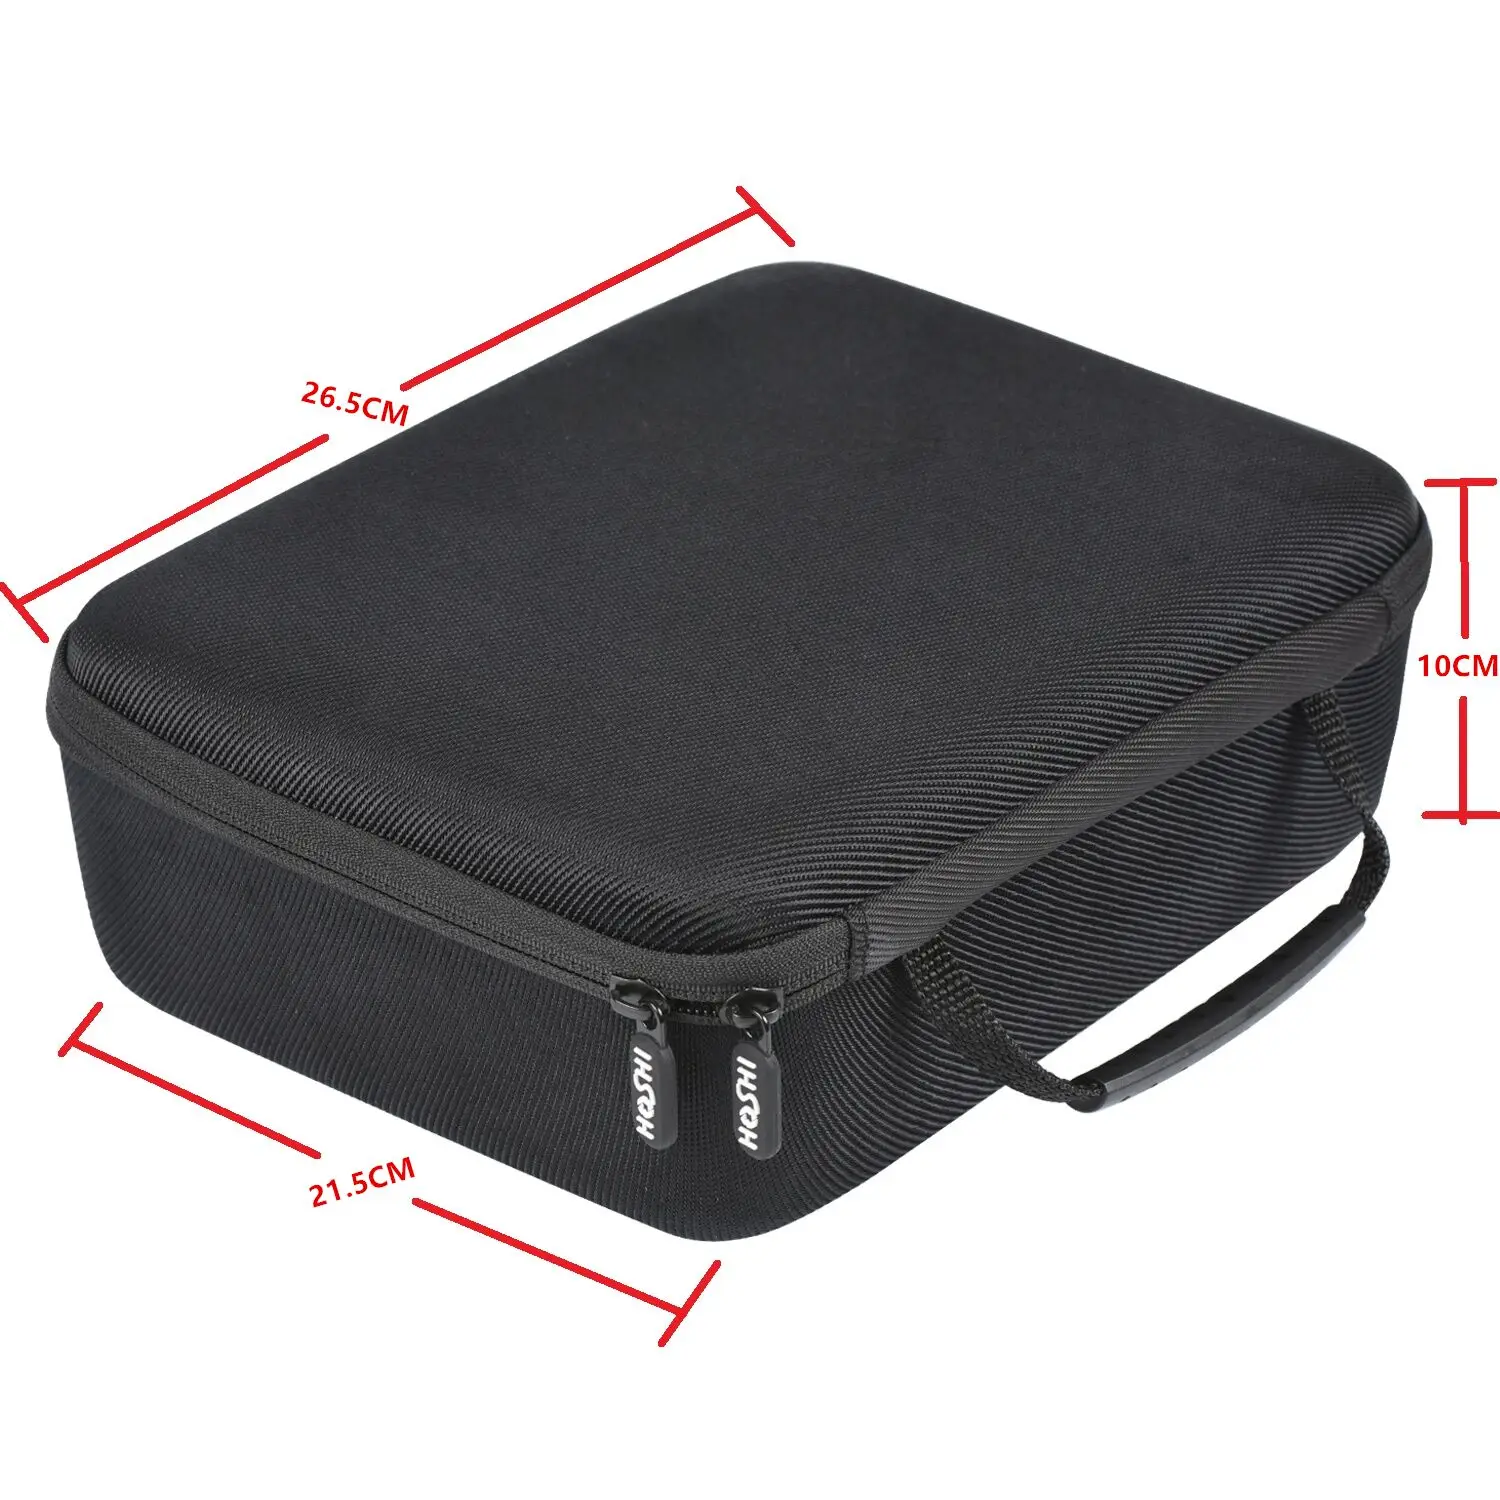 

P002 high quality X103W Carry Case Storage Collection Protection Bag For HS107/KF607/ MJX X103W/SJRC Z5 Drone Accessories, Black